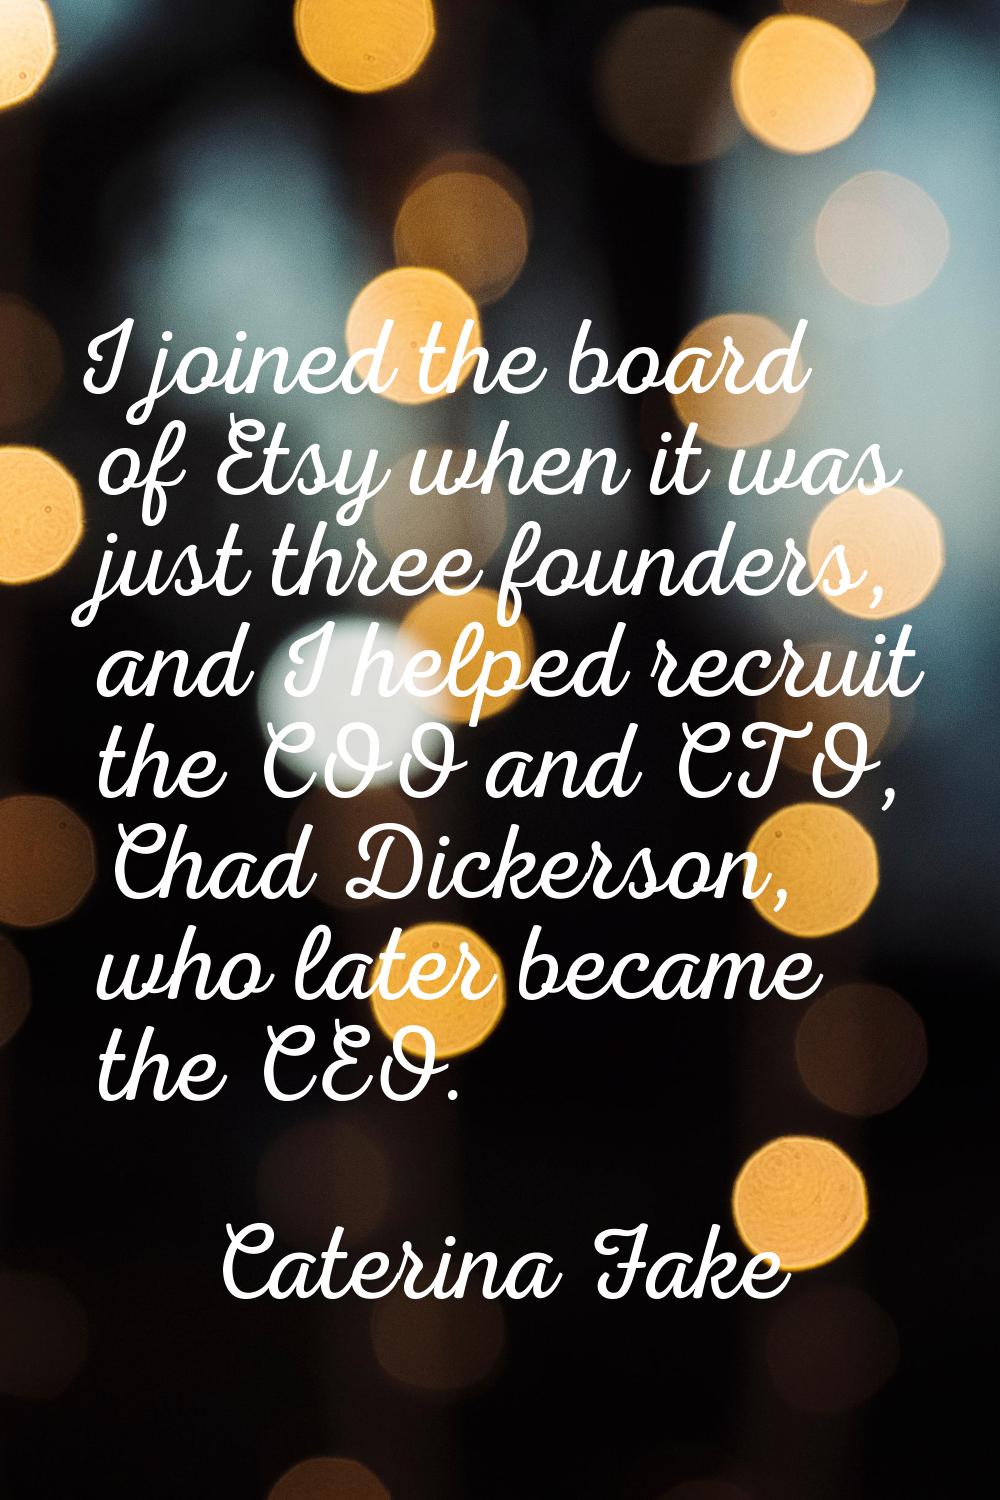 I joined the board of Etsy when it was just three founders, and I helped recruit the COO and CTO, C